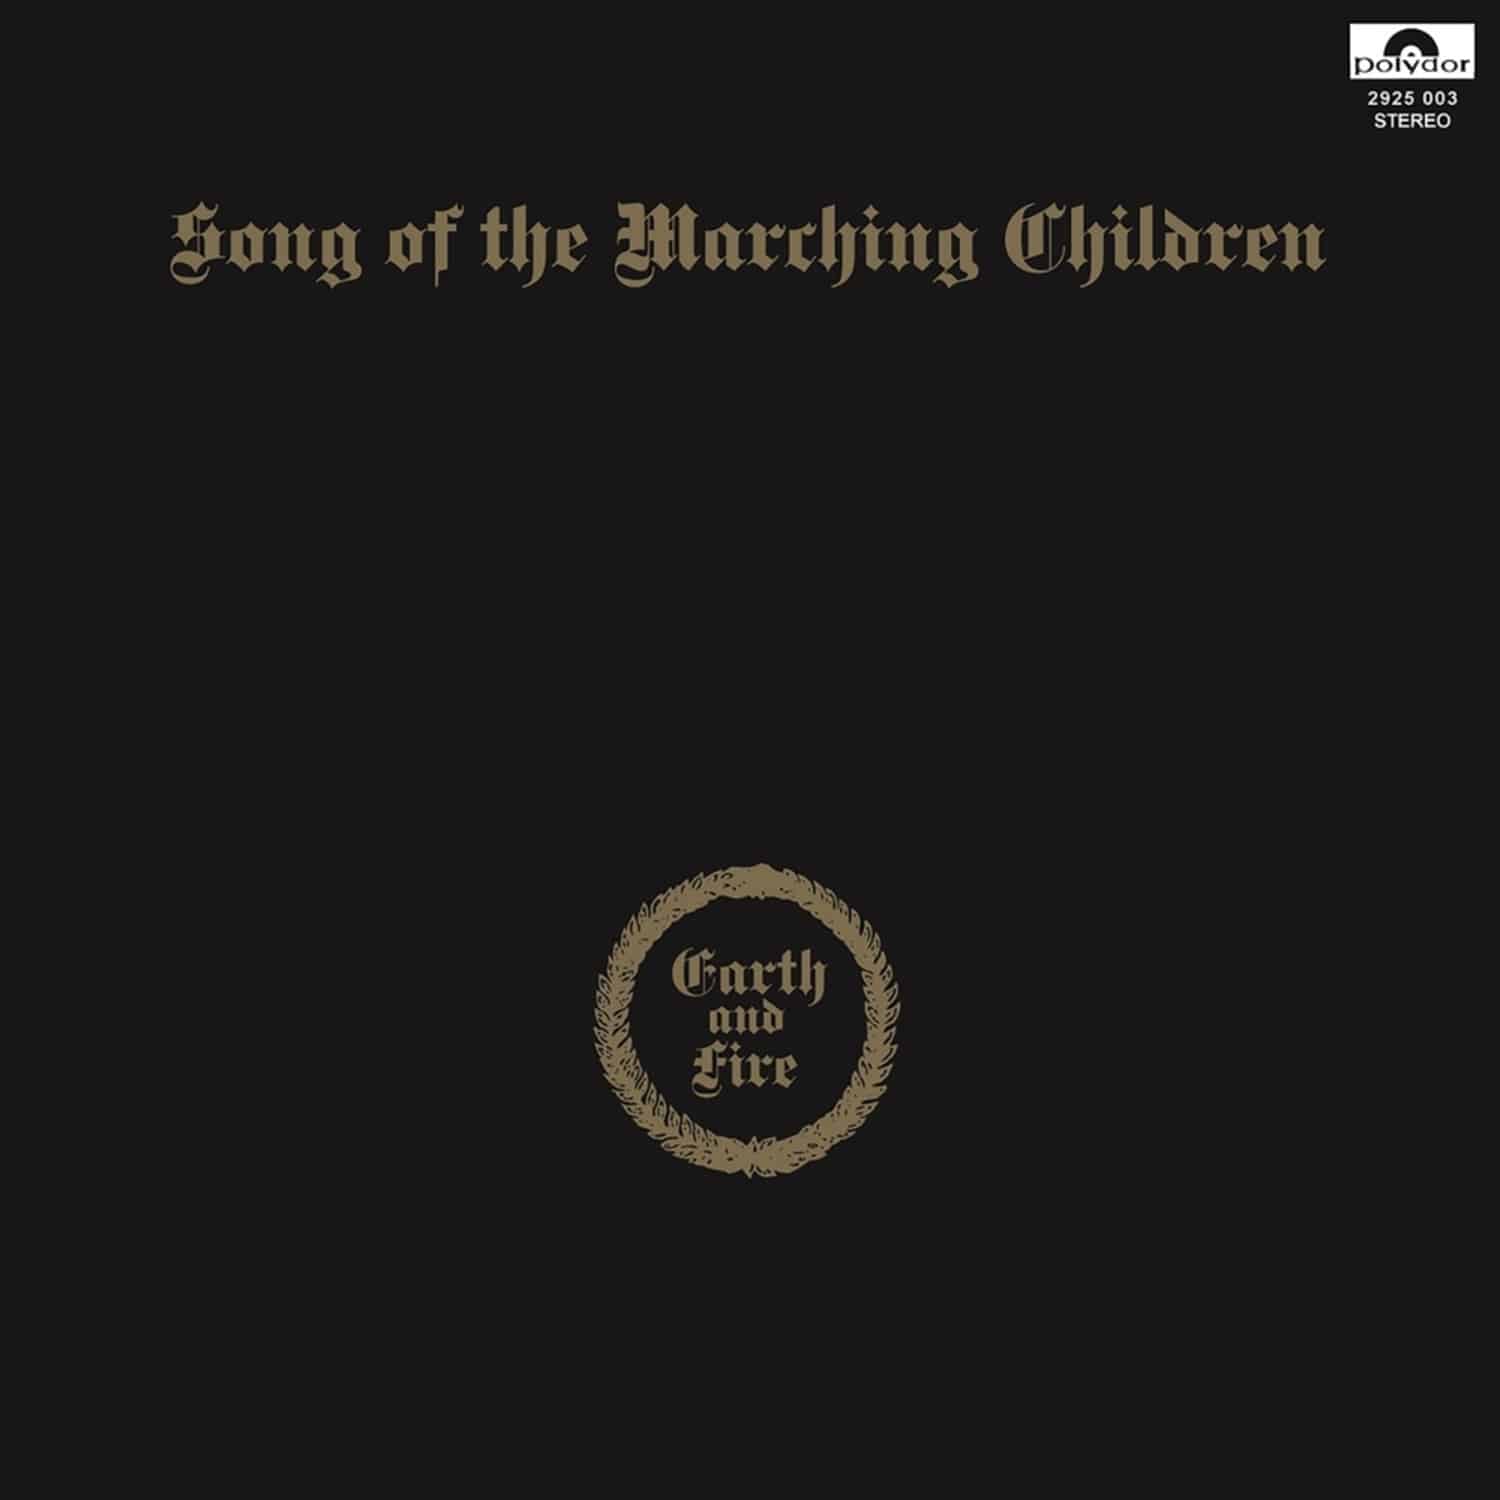 Earth & Fire  - SONG OF THE MARCHING CHILDREN 